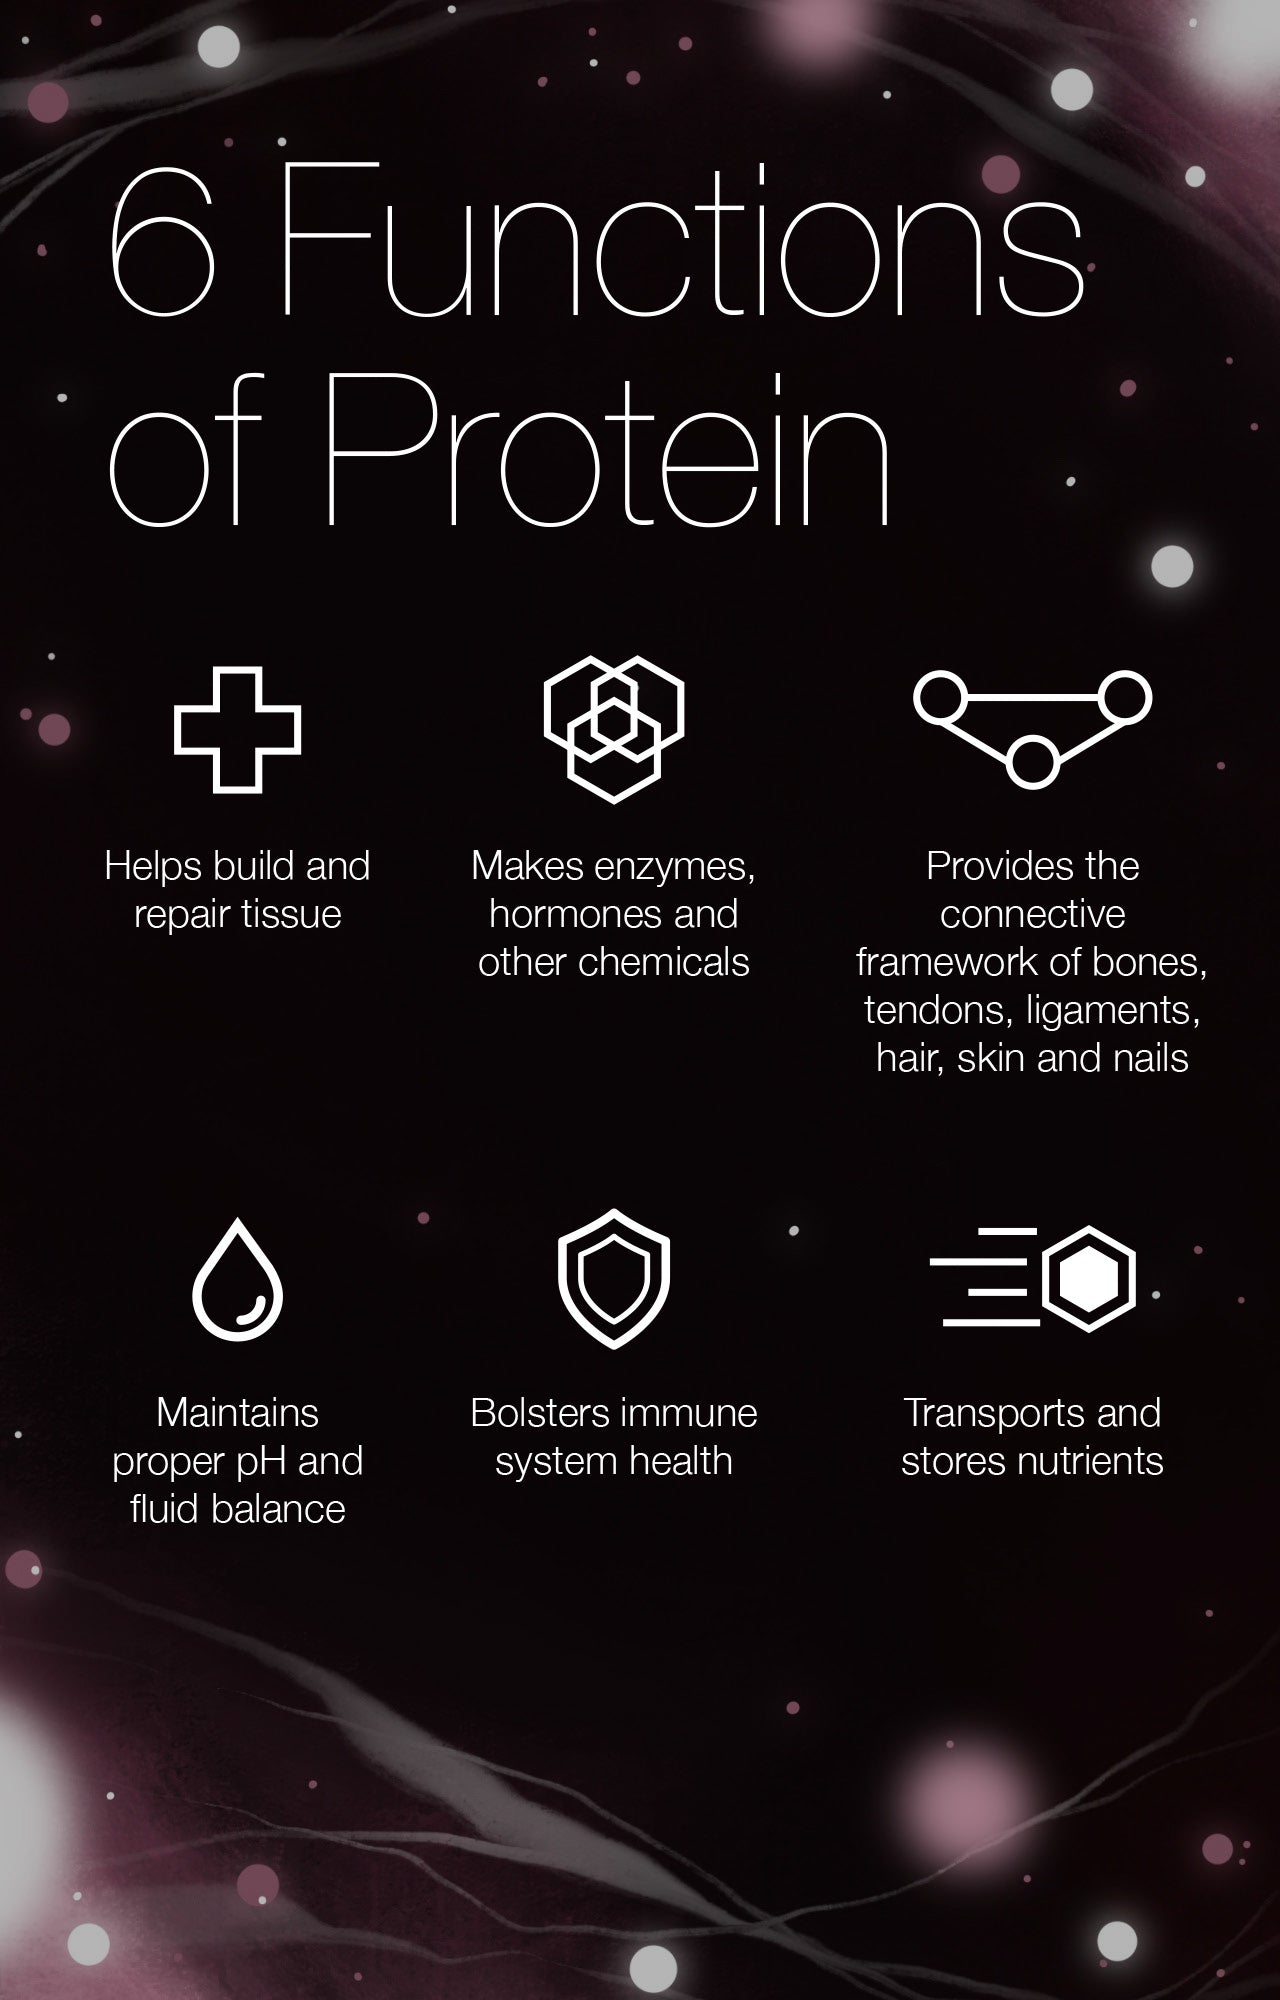 6 Functions of Protein